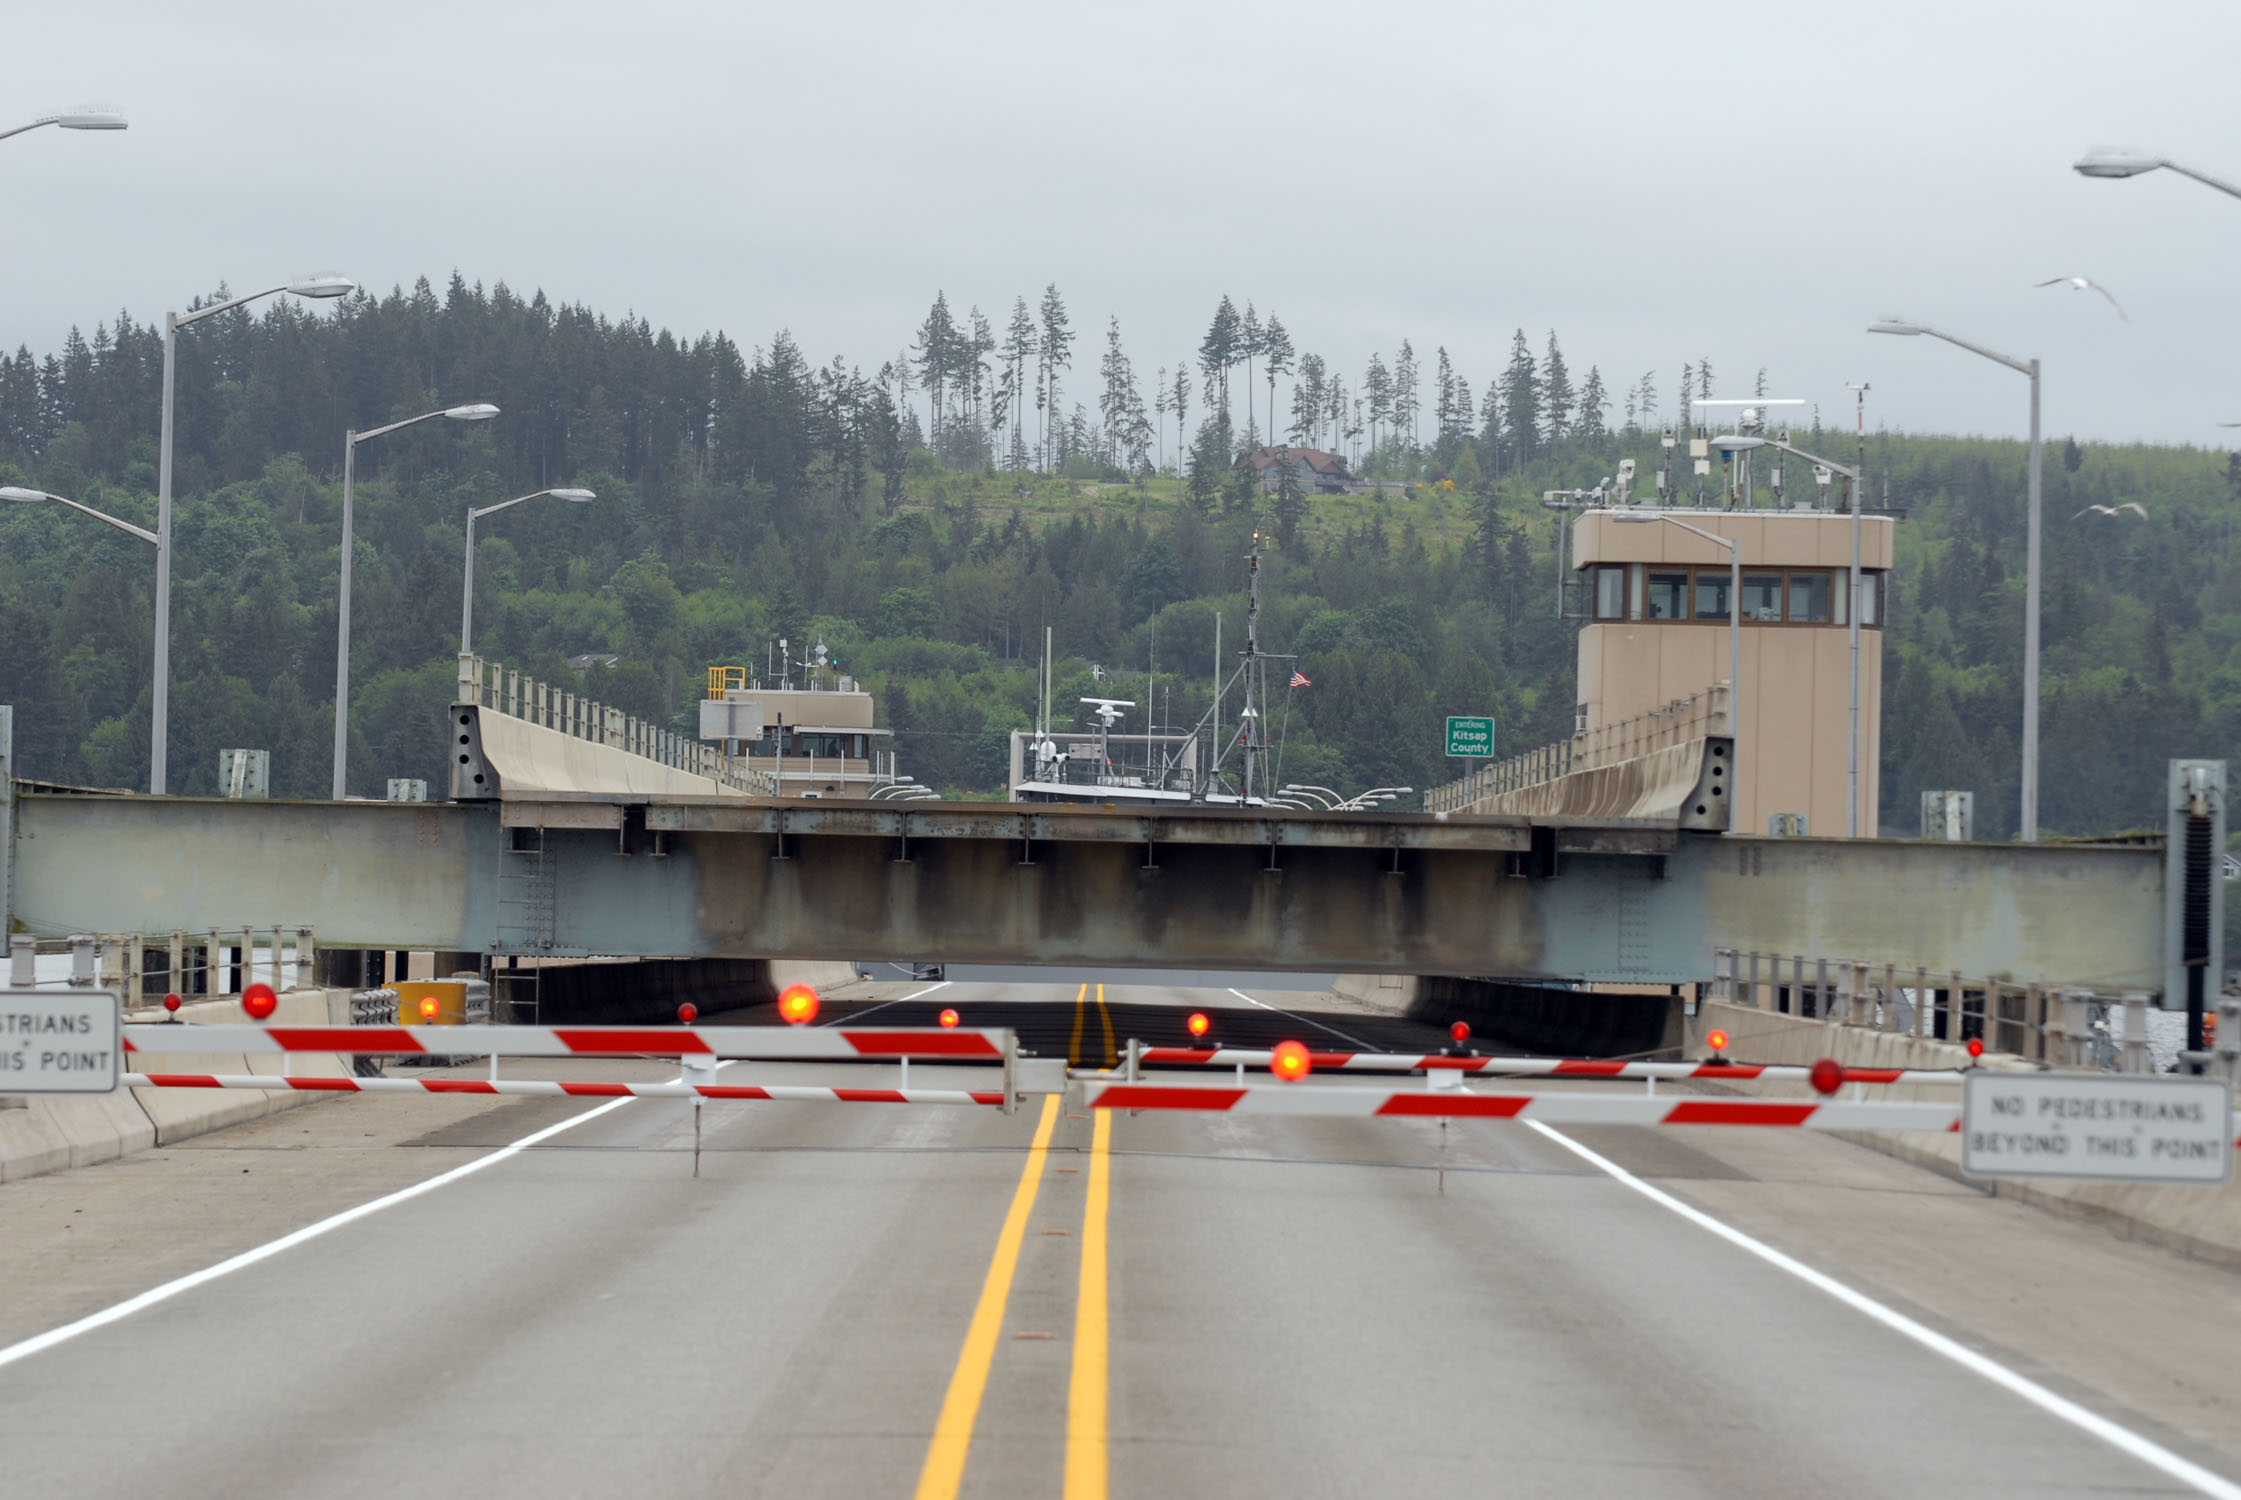 The Hood Canal Bridge is shown in an open position behind traffic barriers. Washington Department of Transportation